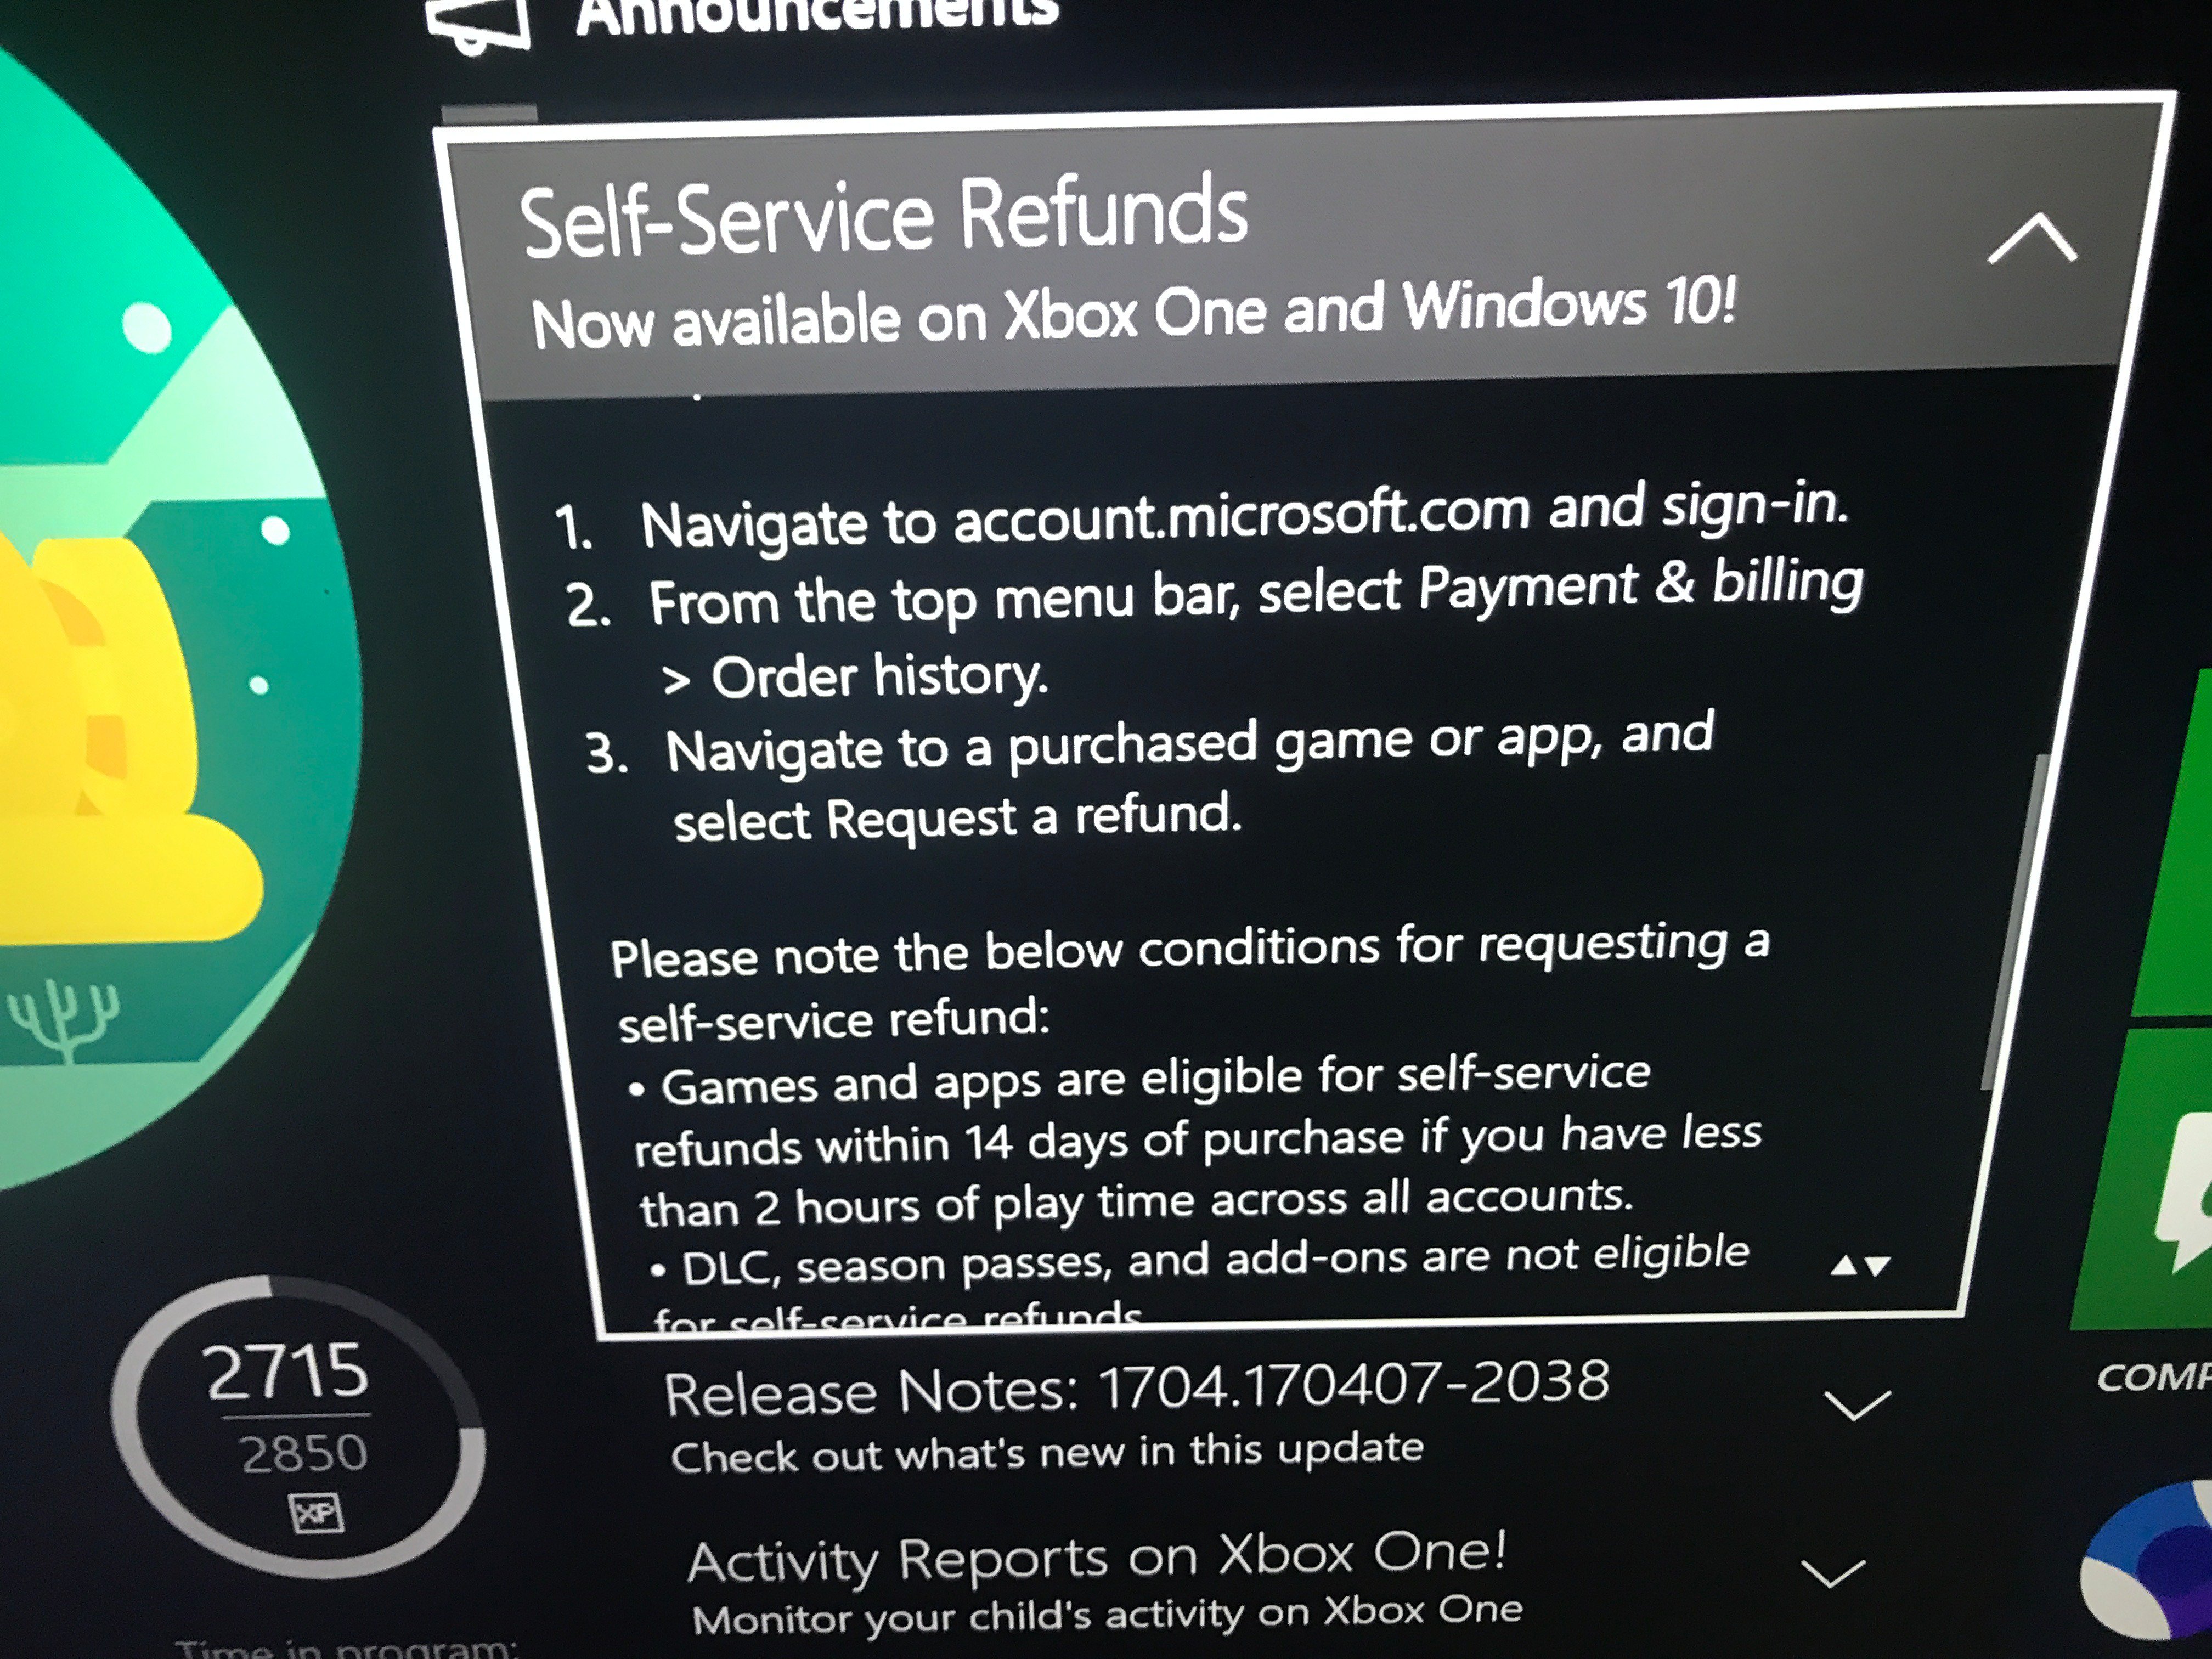 Uitsluiten Krijt winkel Daniel Ahmad on Twitter: "You can now refund digital Xbox games yourself  within 14 days / max 2 hours playtime. Great work @Xbox.  https://t.co/gA0ap9HvQI https://t.co/A39RSw9xnU" / Twitter